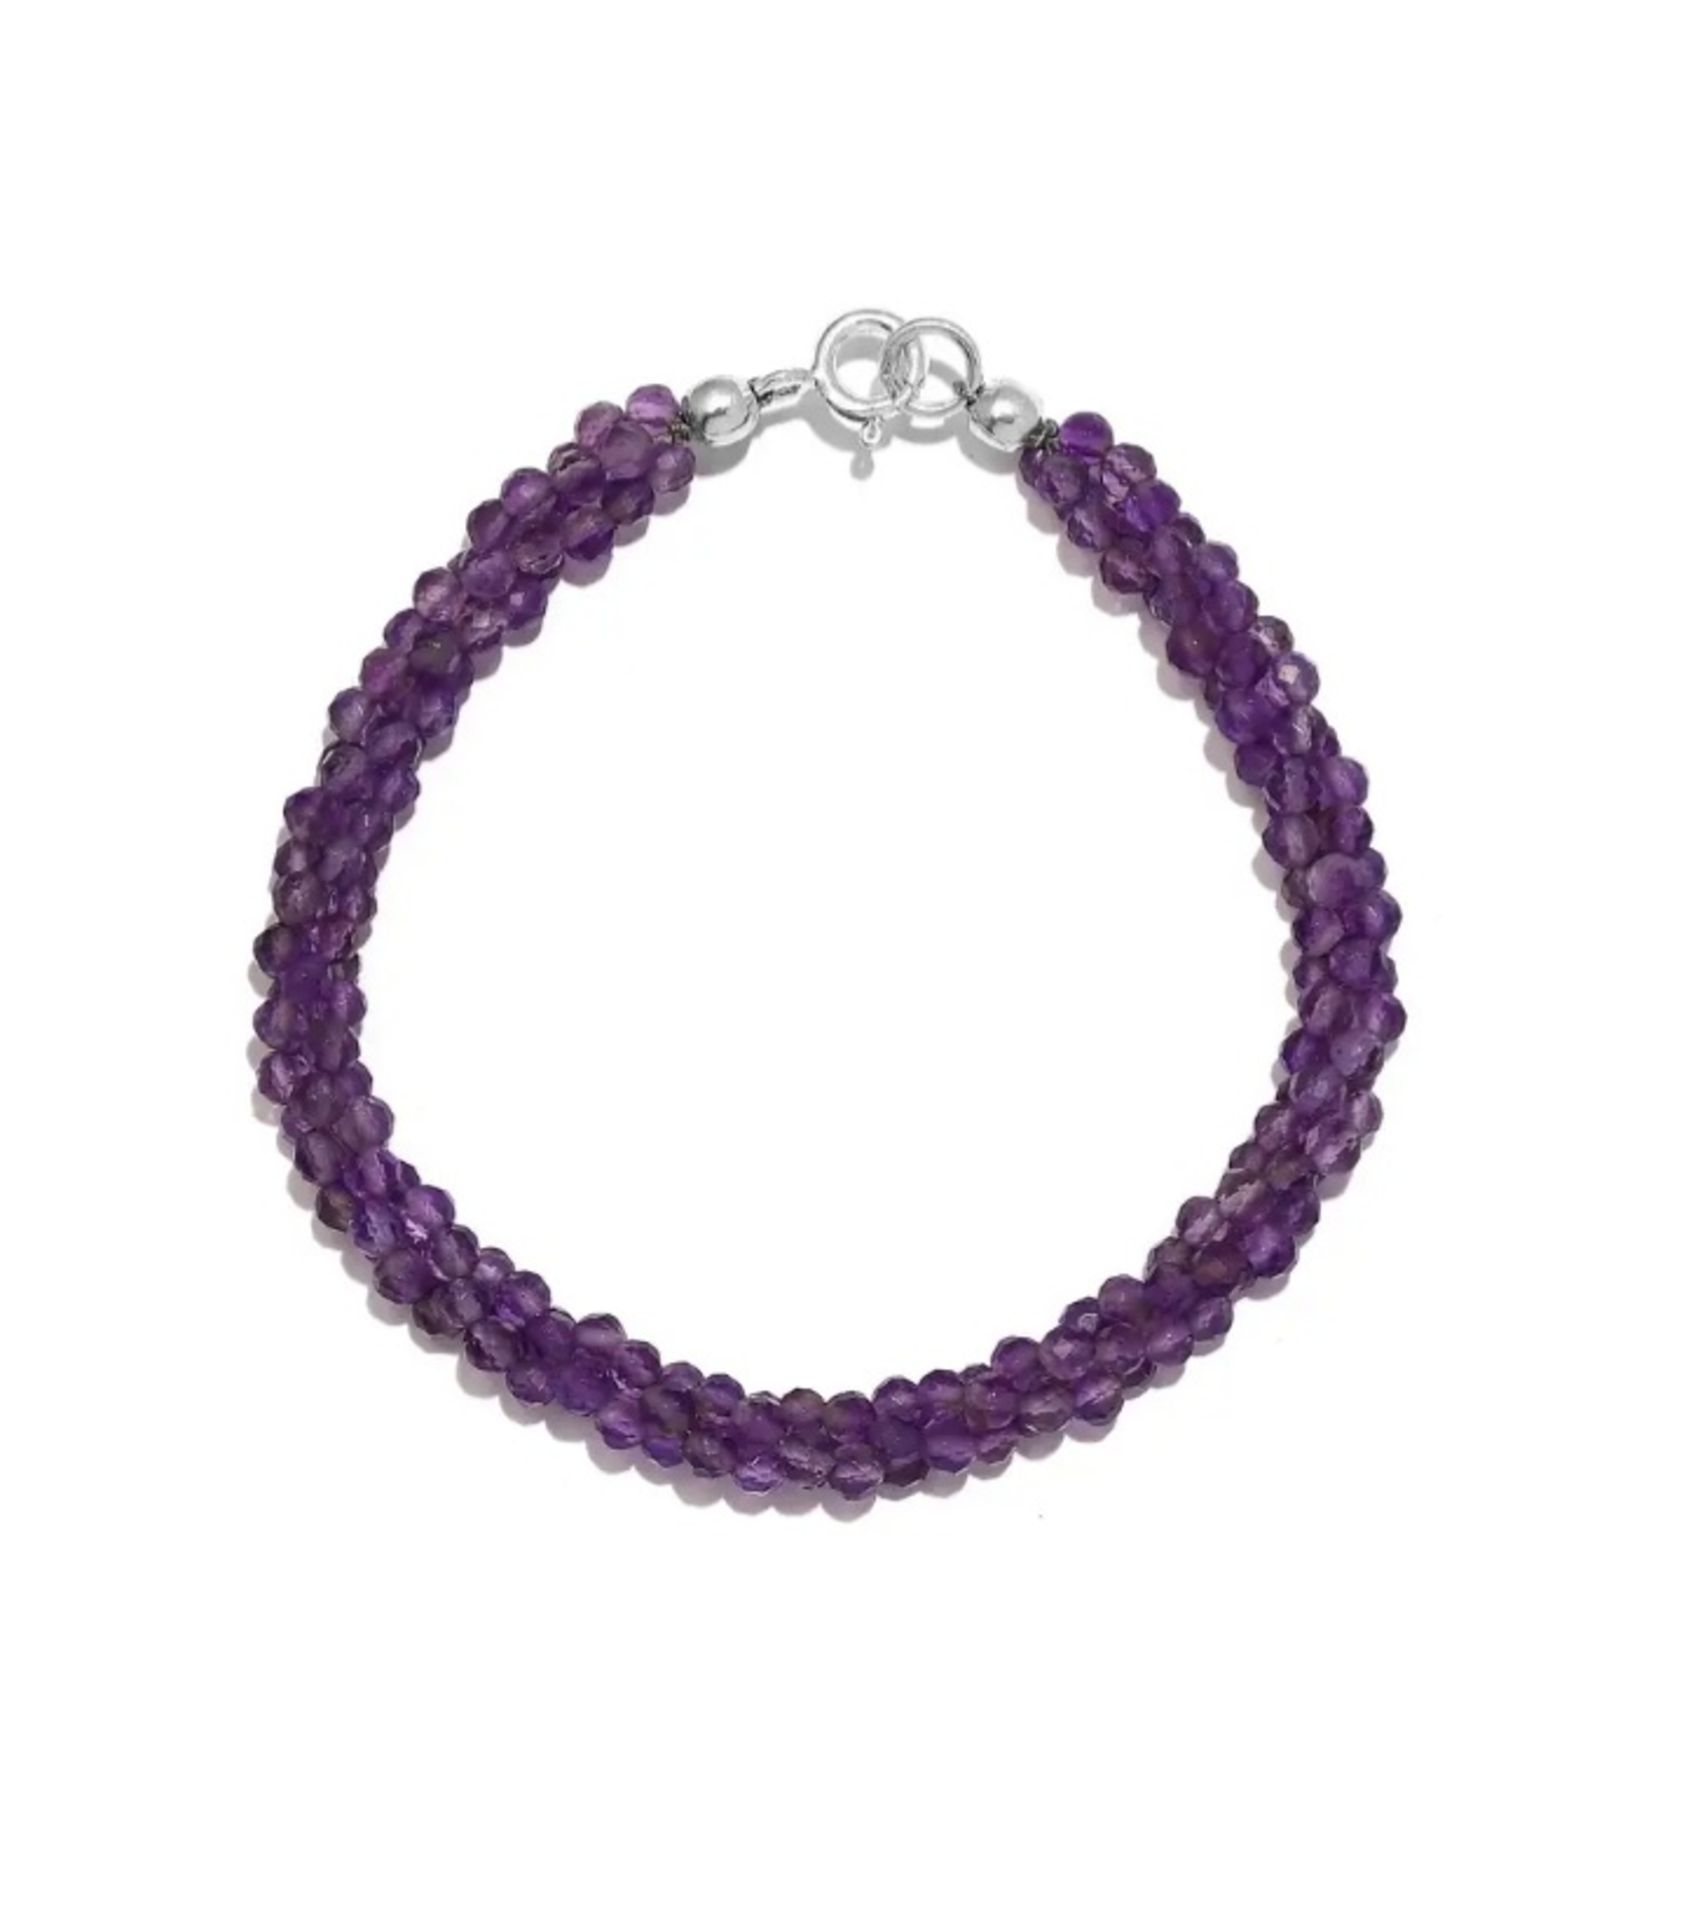 New! Amethyst Bracelet With Spring Ring Clasp in Sterling Silver - Image 2 of 3